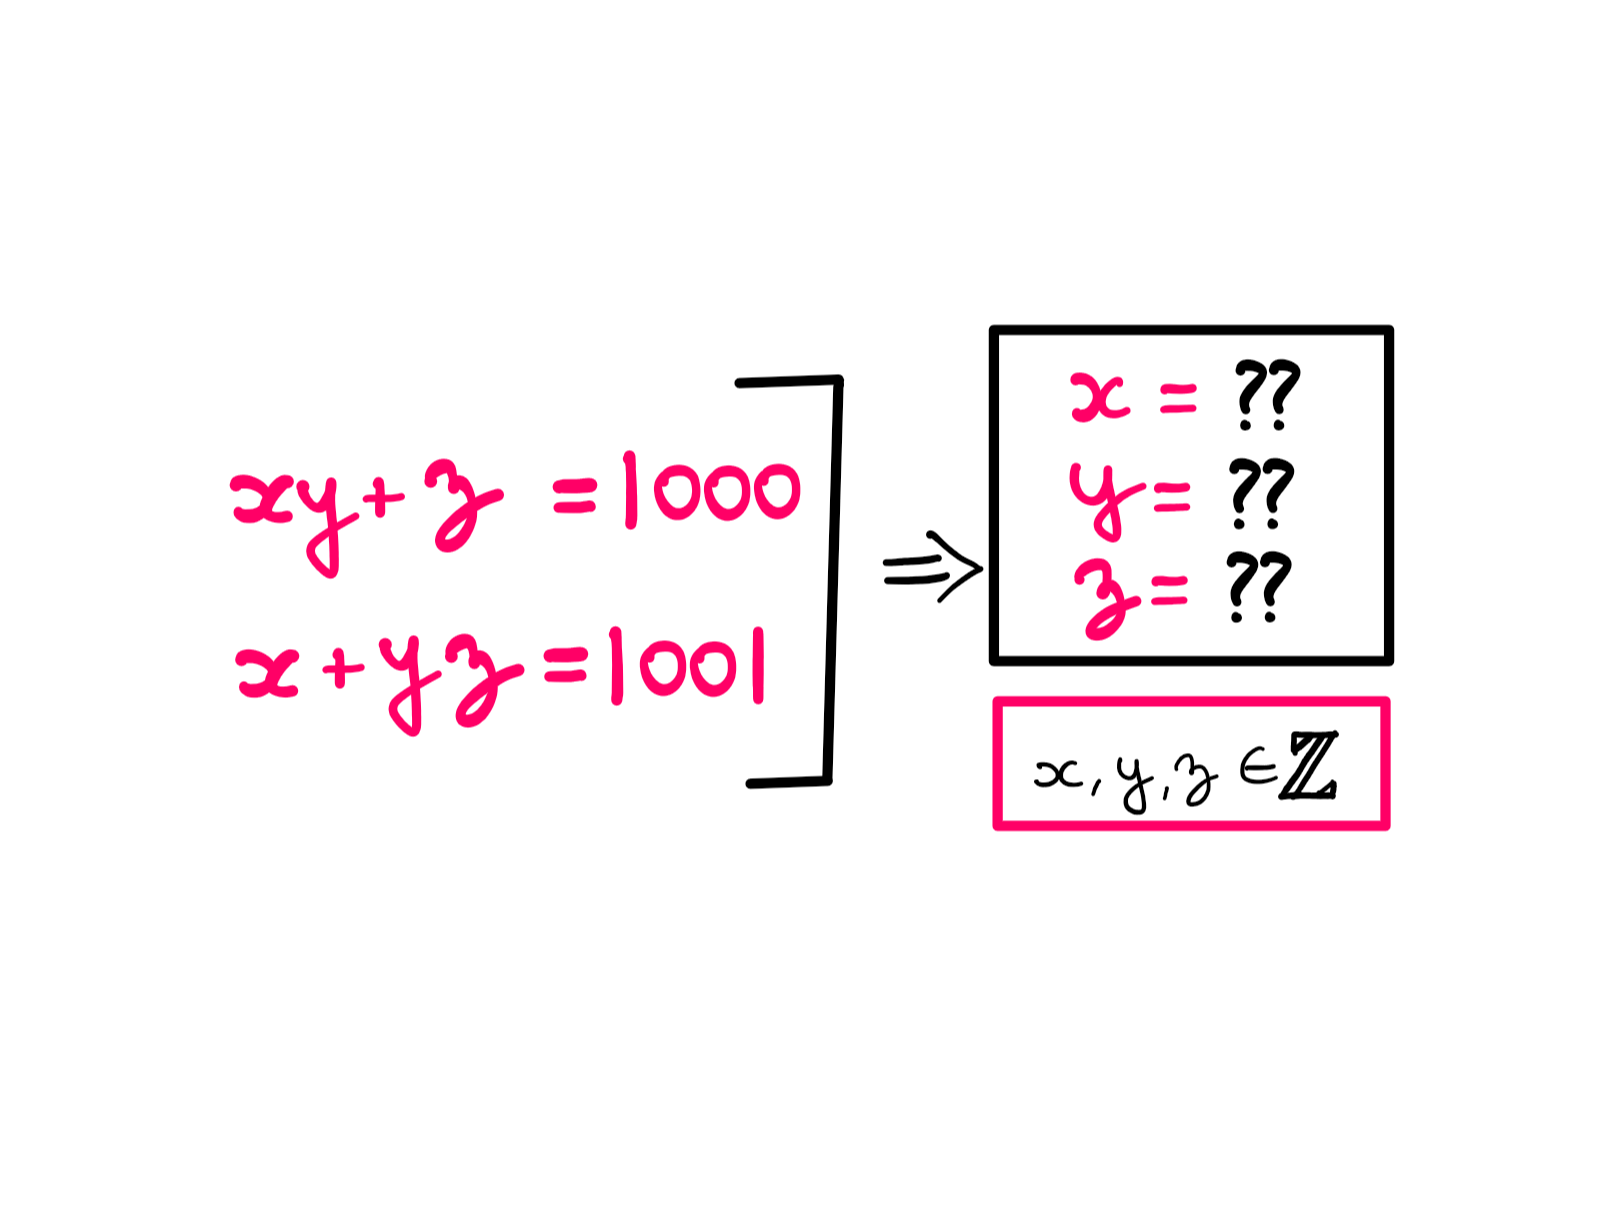 How To Really Solve This Tricky Algebra Problem (VIII) - On the left-hand side, two equations are hand-written: xy + z = 1000; x + yz = 1001; Given these equations, on the right-hand side, the following questions are written down: x = ??; y = ??; z = ?? Below these questions, the author writes that x, y, and z belong to the set of all integers.